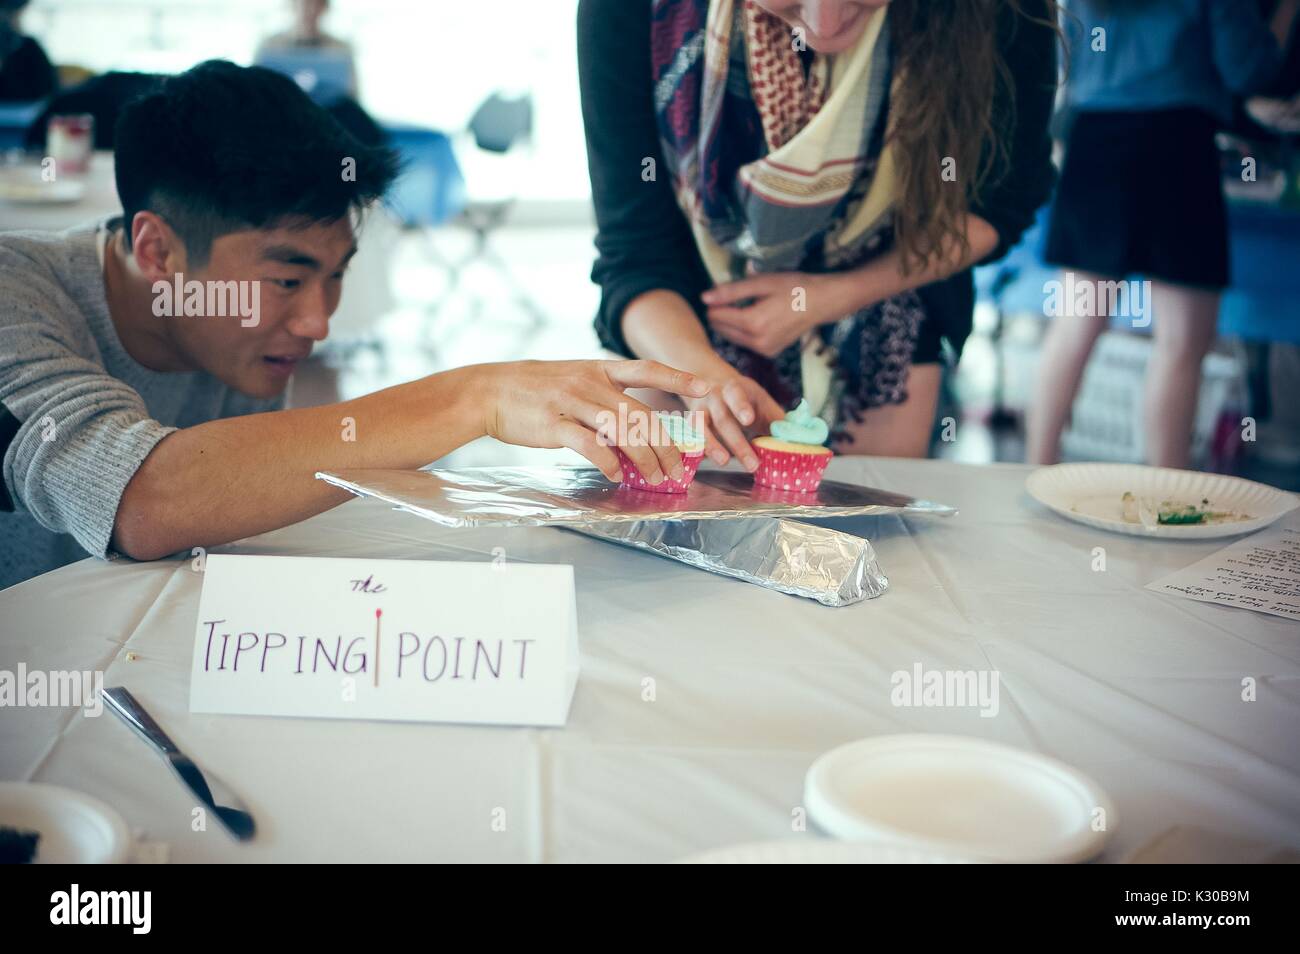 Two undergraduate students looking at an aluminum scale with cupcakes on it representing 'The Tipping Point' by Malcolm Gladwell at the Edible Book Festival at Johns Hopkins University, Baltimore, Maryland, March 31, 2016. Courtesy Eric Chen. Stock Photo